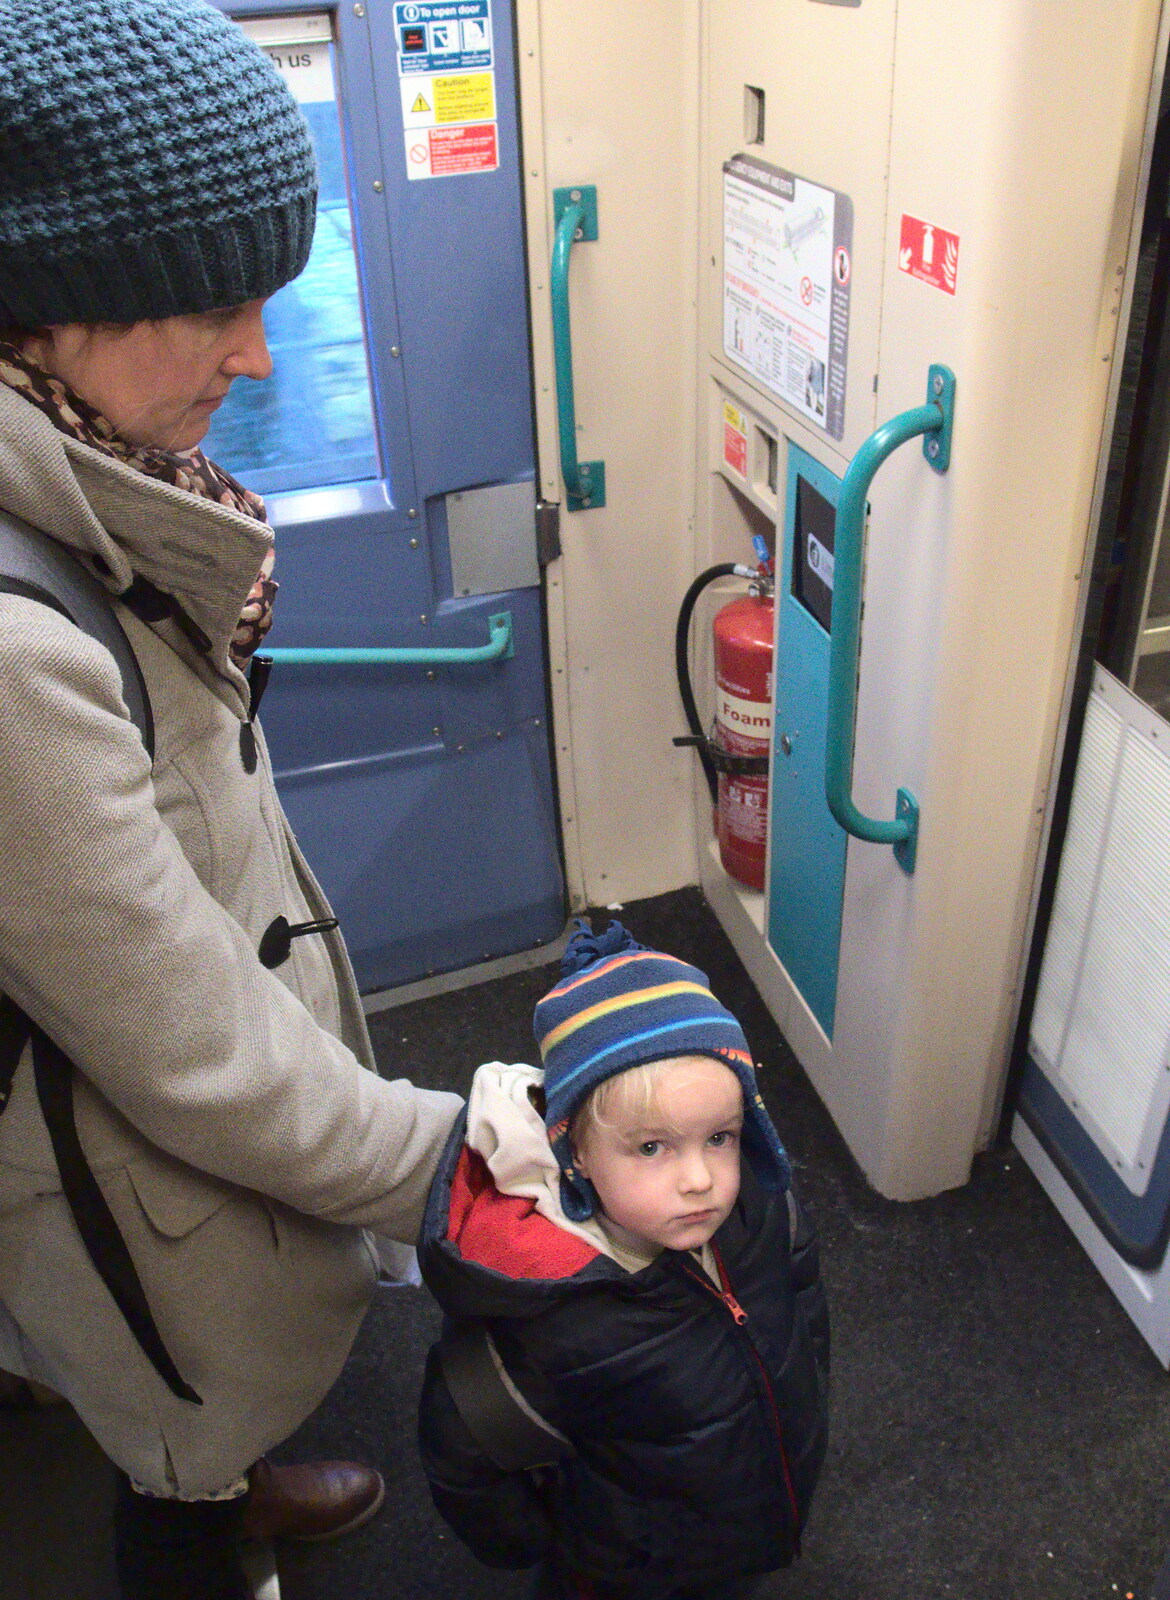 Isobel and Harry in a Mark 3 vestibule from The Mobile Train Office, Diss to London - 5th March 2015